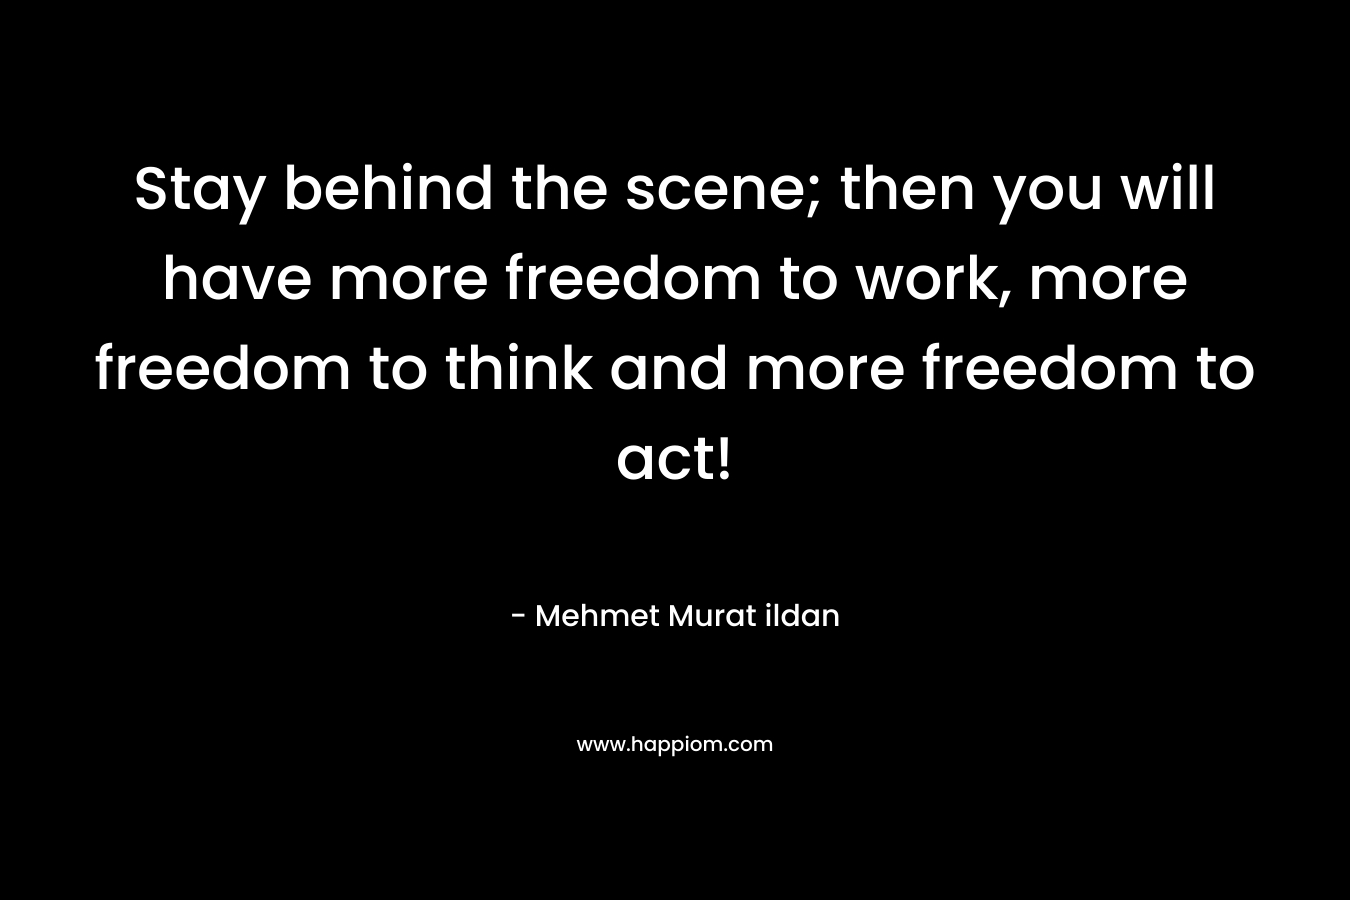 Stay behind the scene; then you will have more freedom to work, more freedom to think and more freedom to act!